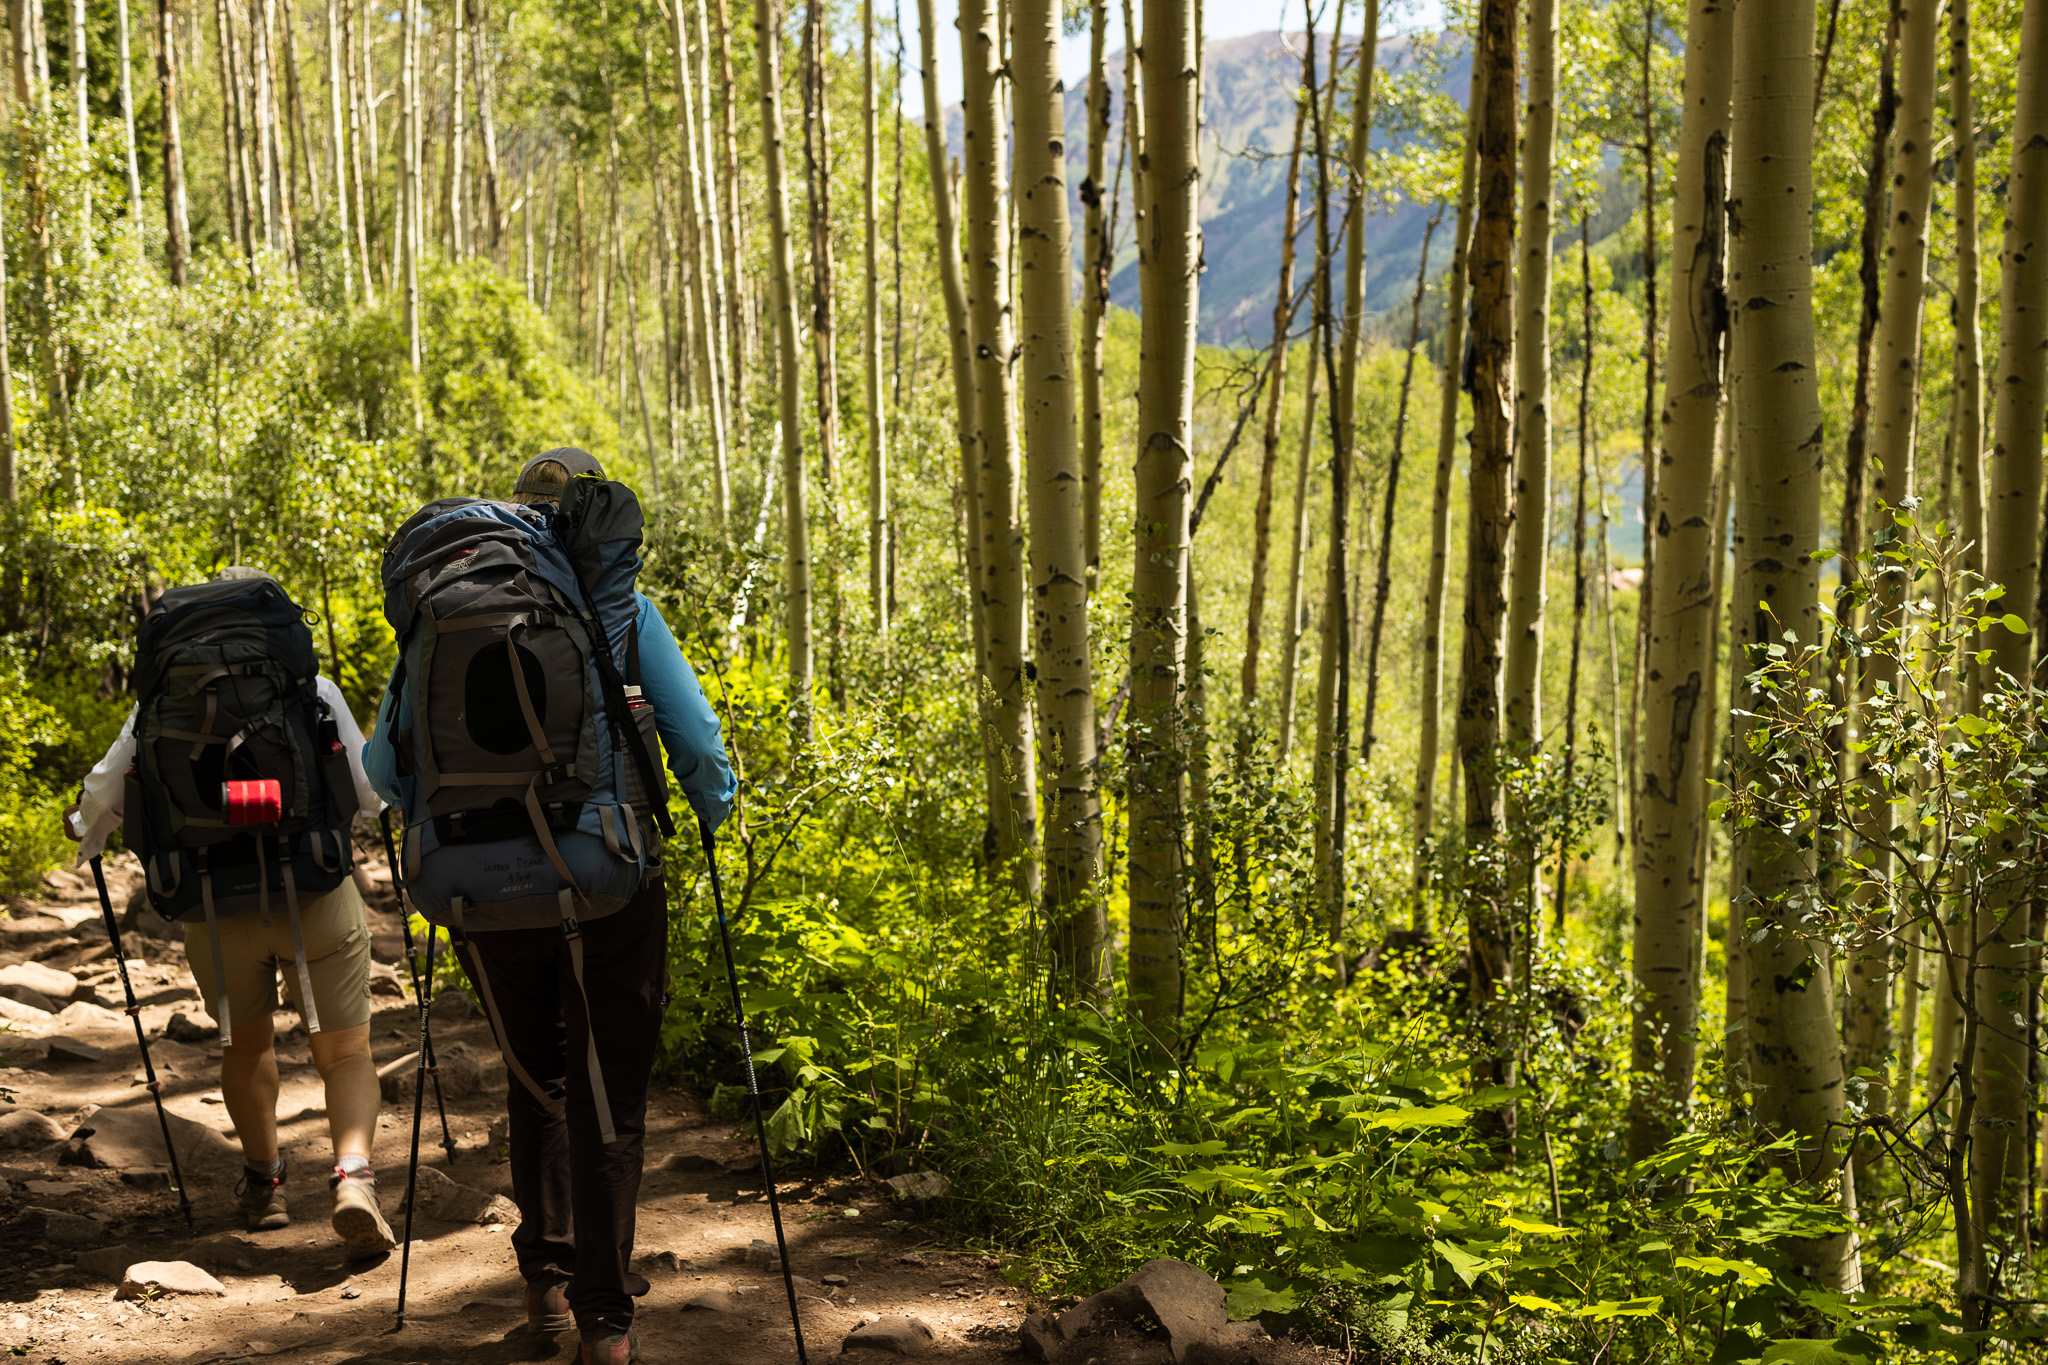 Landon Trail Adventures: Gear Up for Scenic Hikes!